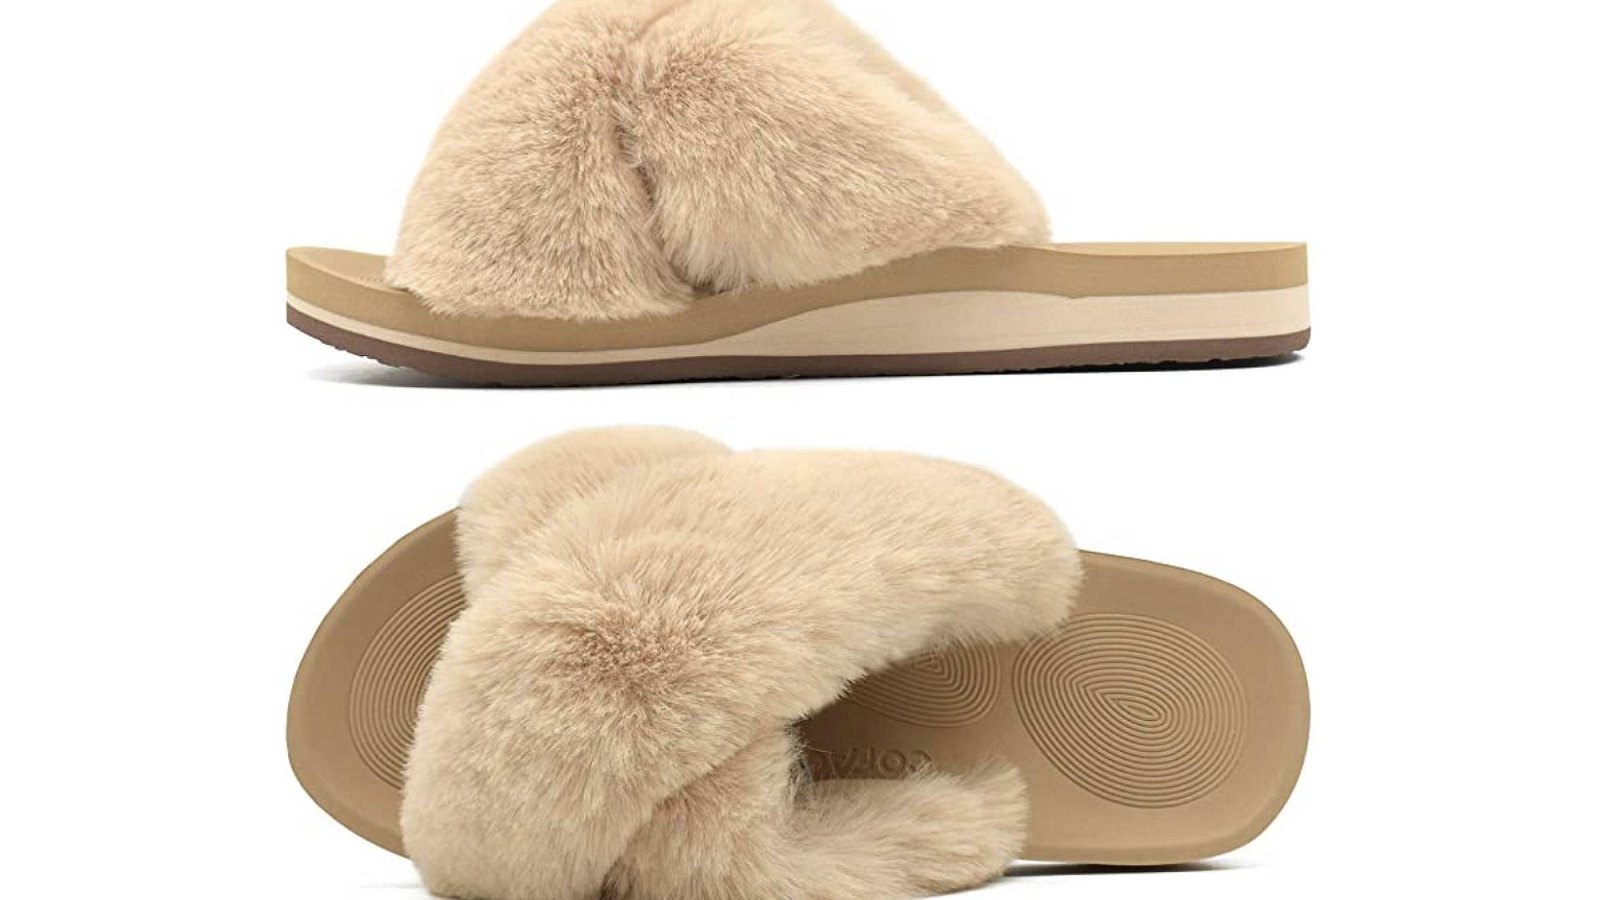 Coface Fuzzy Slippers Are Comfy and Have Incredible Arch Support UsWeekly